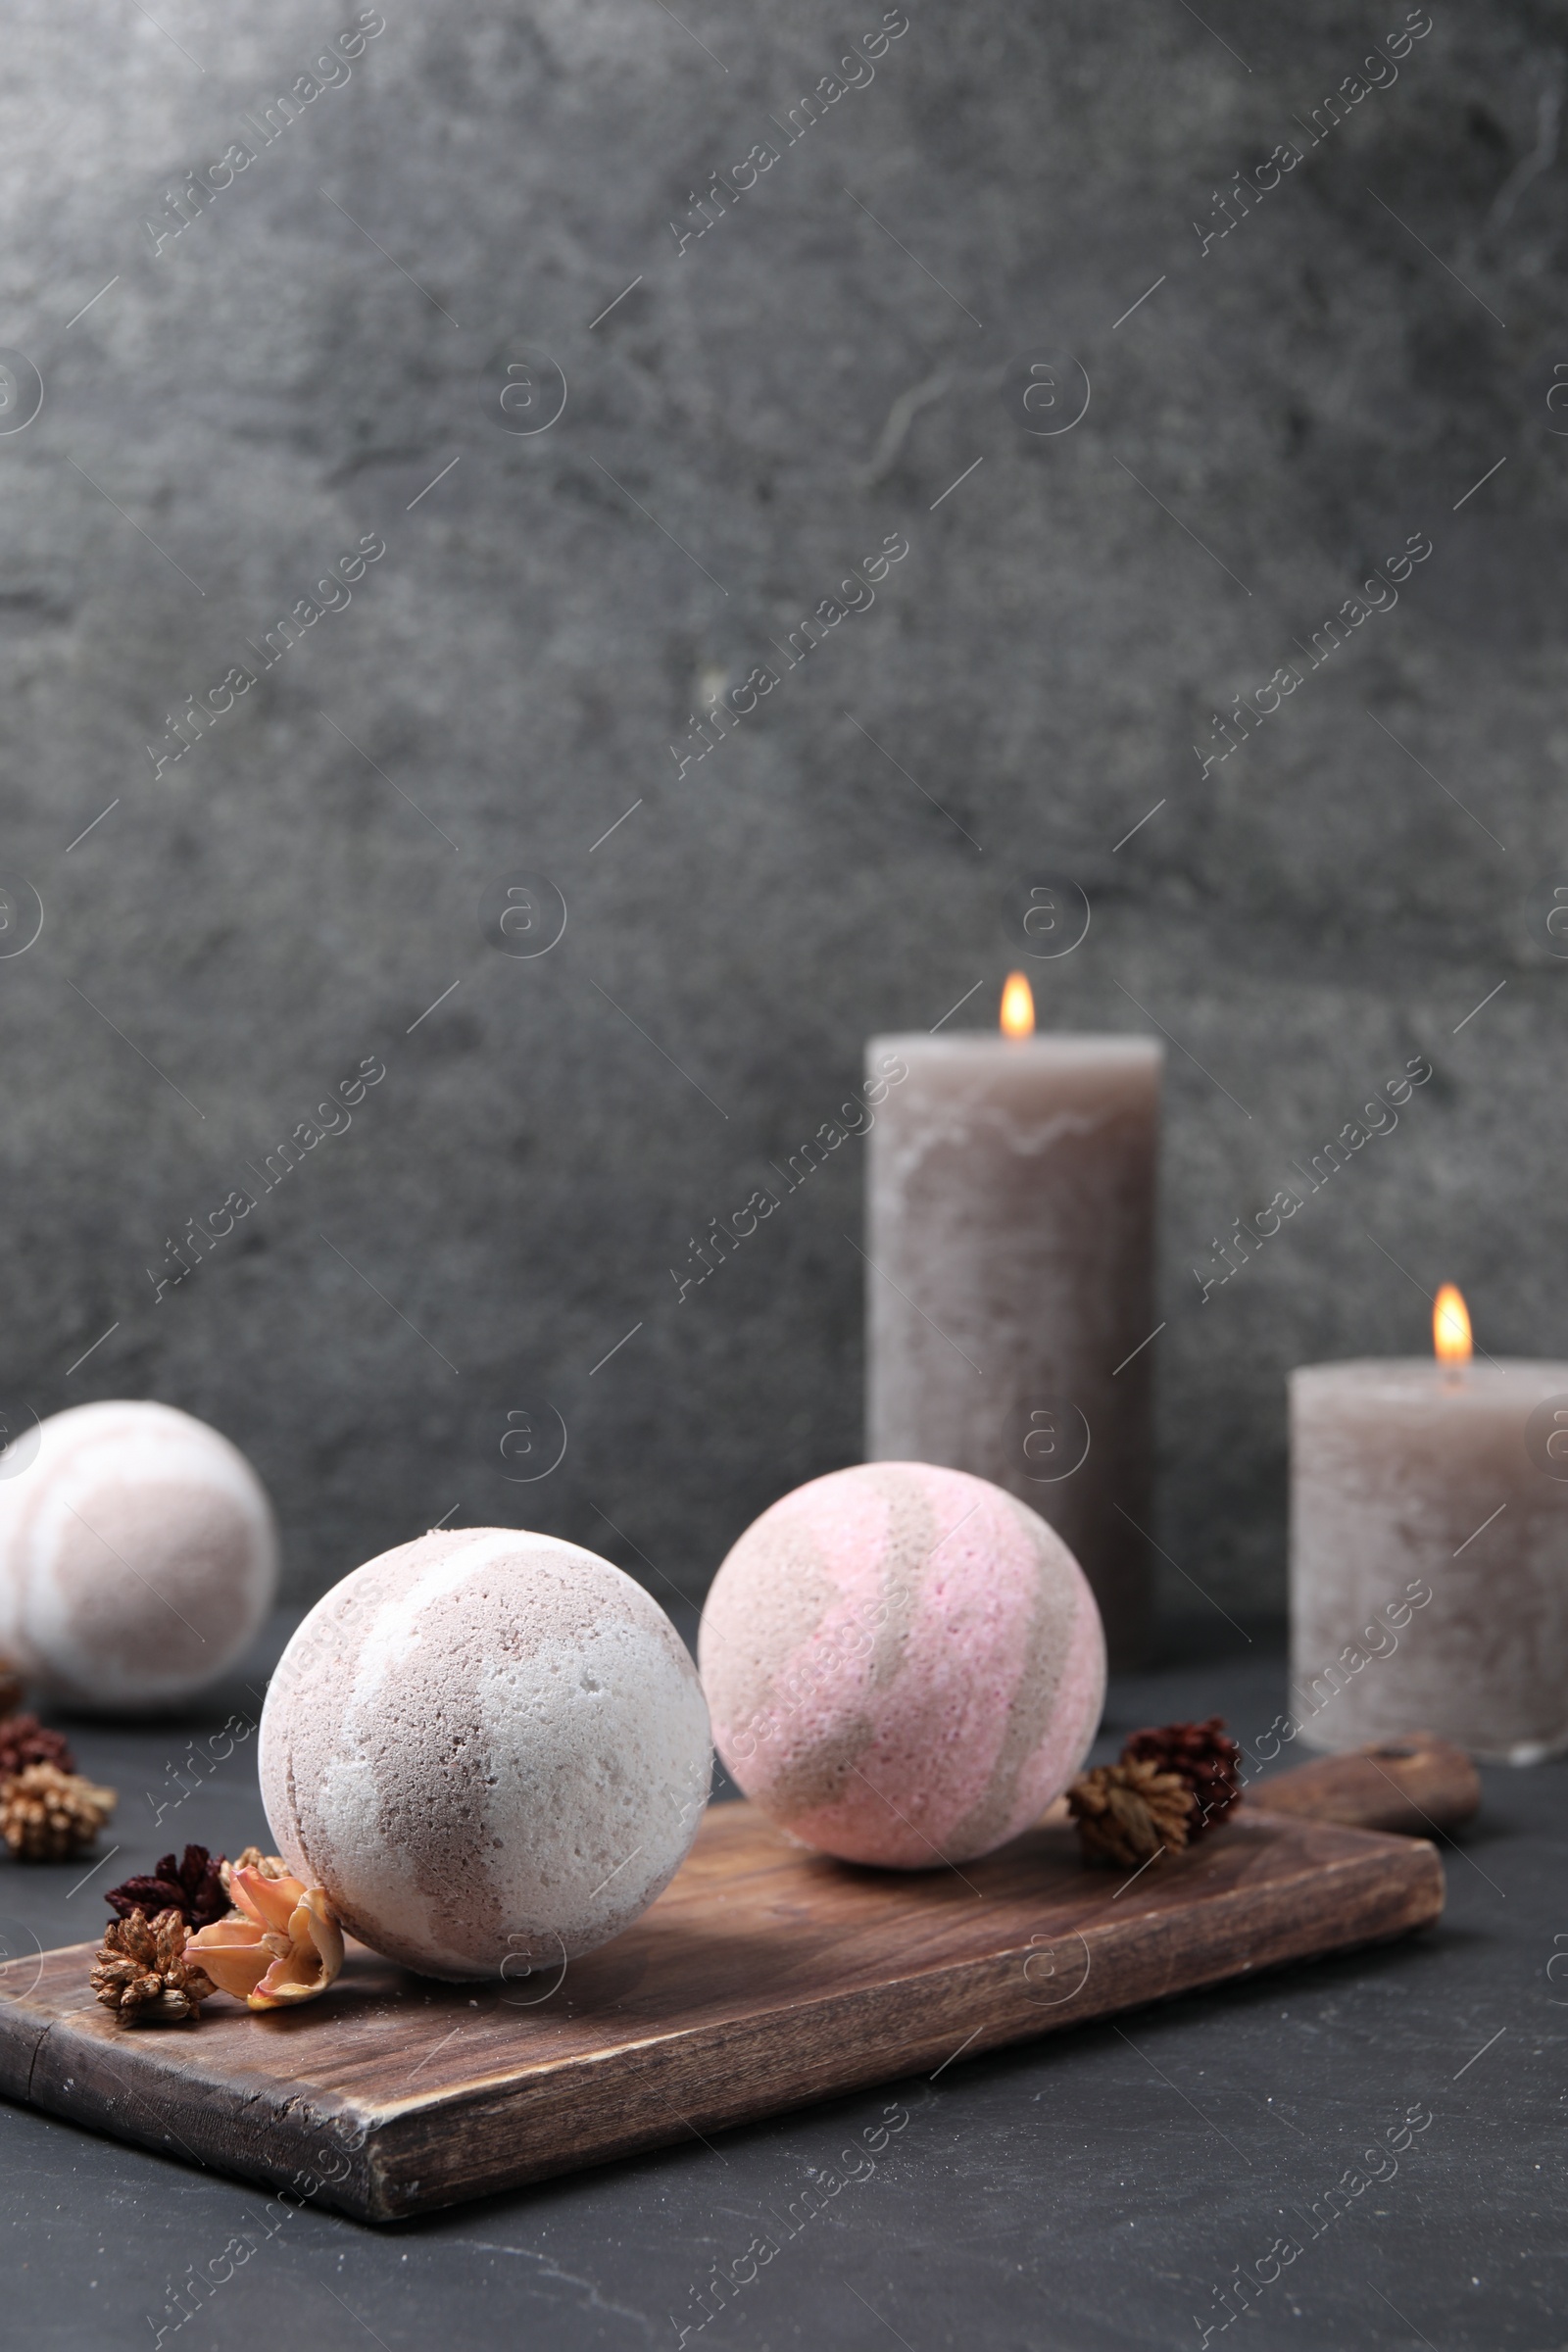 Photo of Bath bombs, dry flowers and burning candles on black table